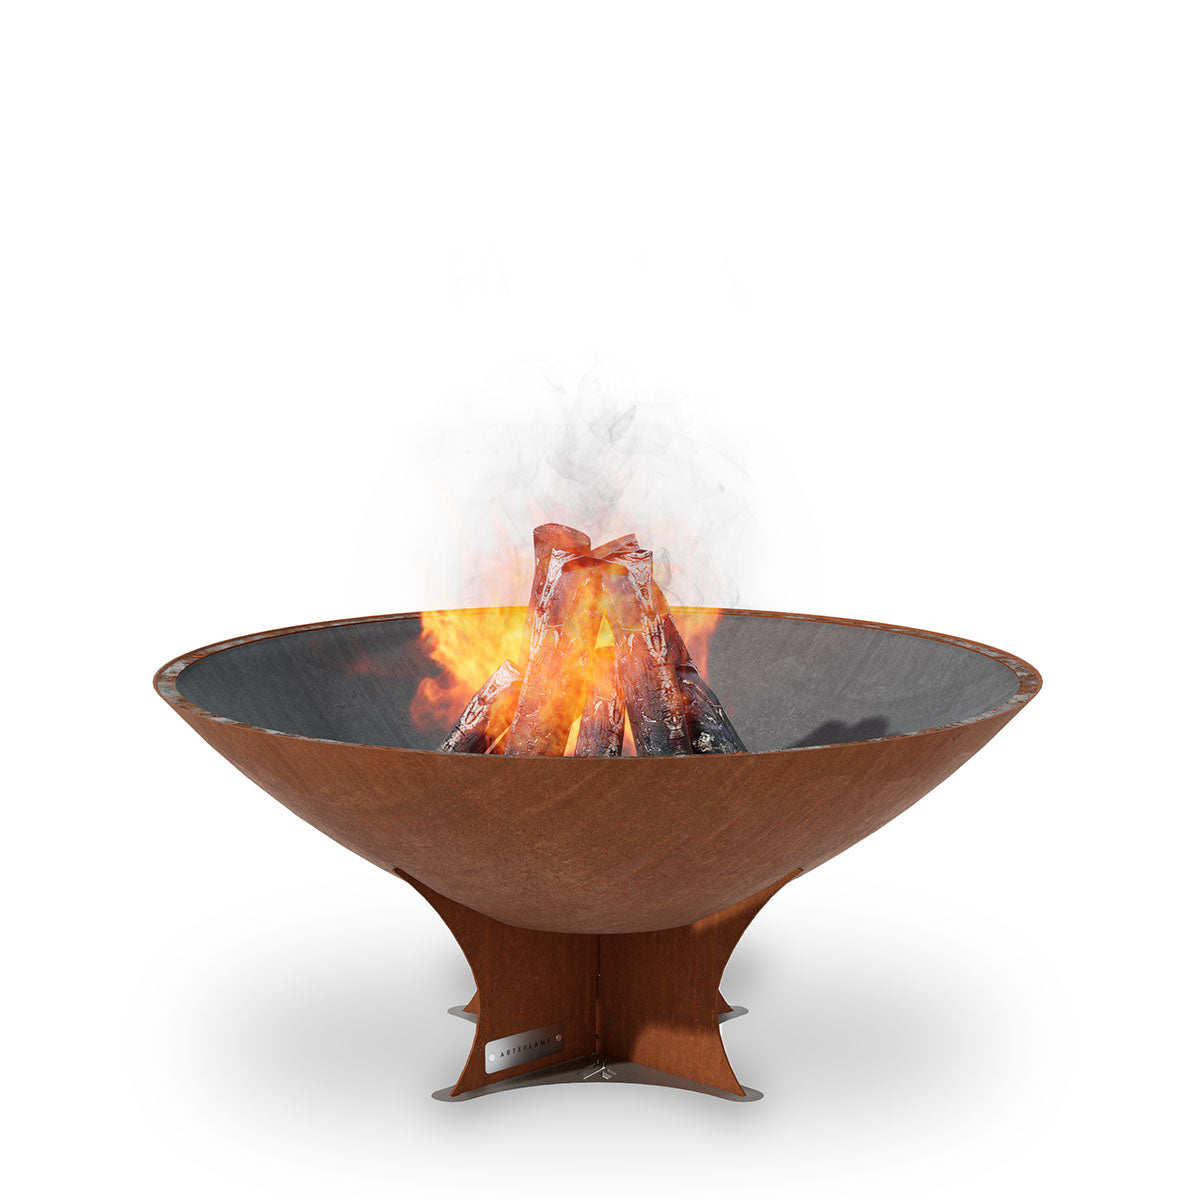 Arteflame 40" Wood Burning Fire Pit